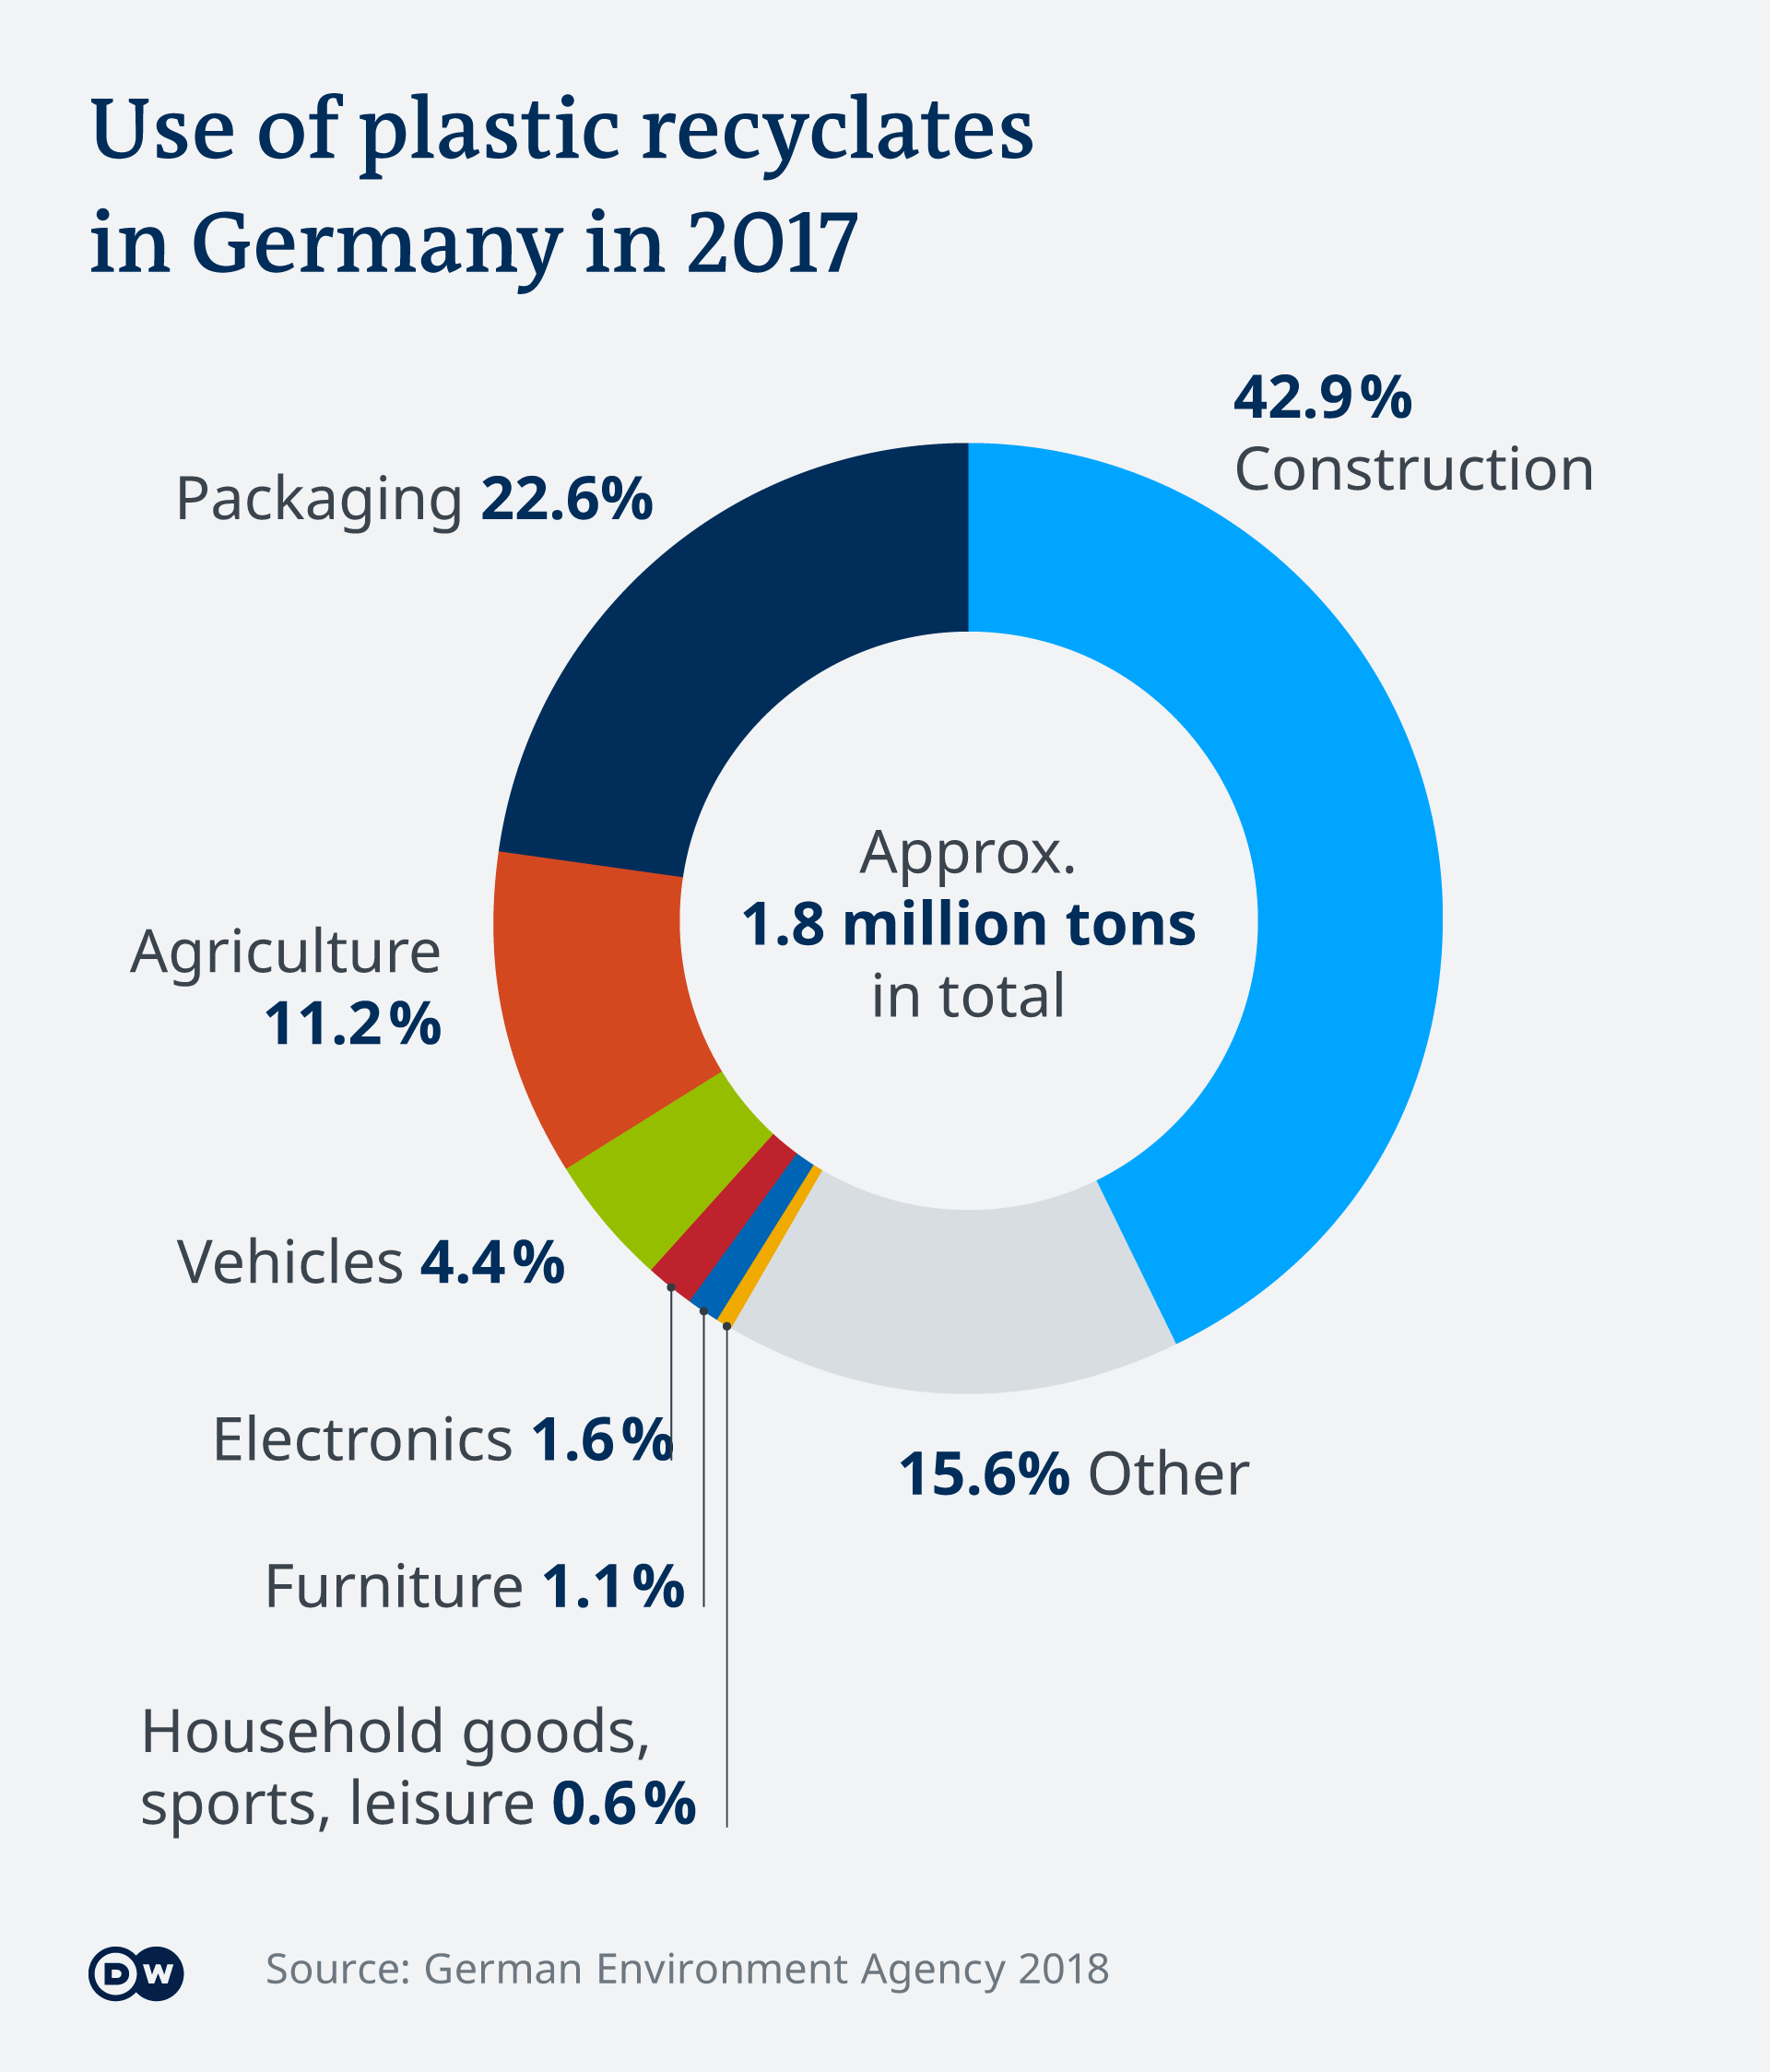 The use of plastic recyclates in Germany in 2017 